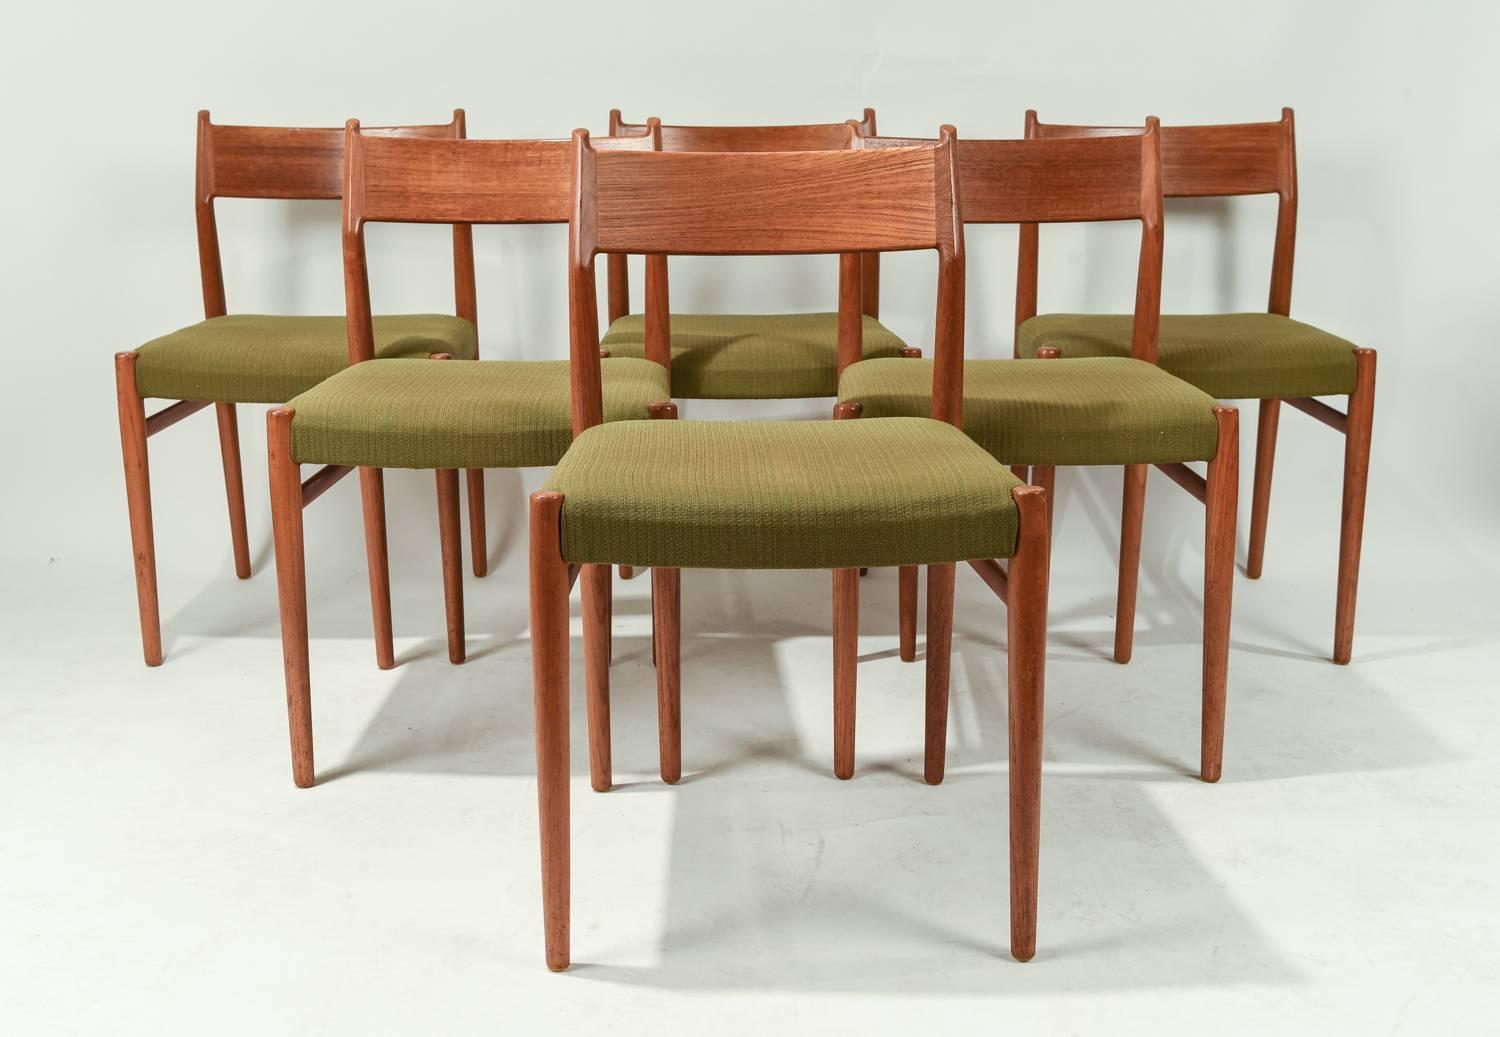 A set of six teak dining chairs designed by Arne Vodder for Sibast Mobler, model 418. Great proportions and look.